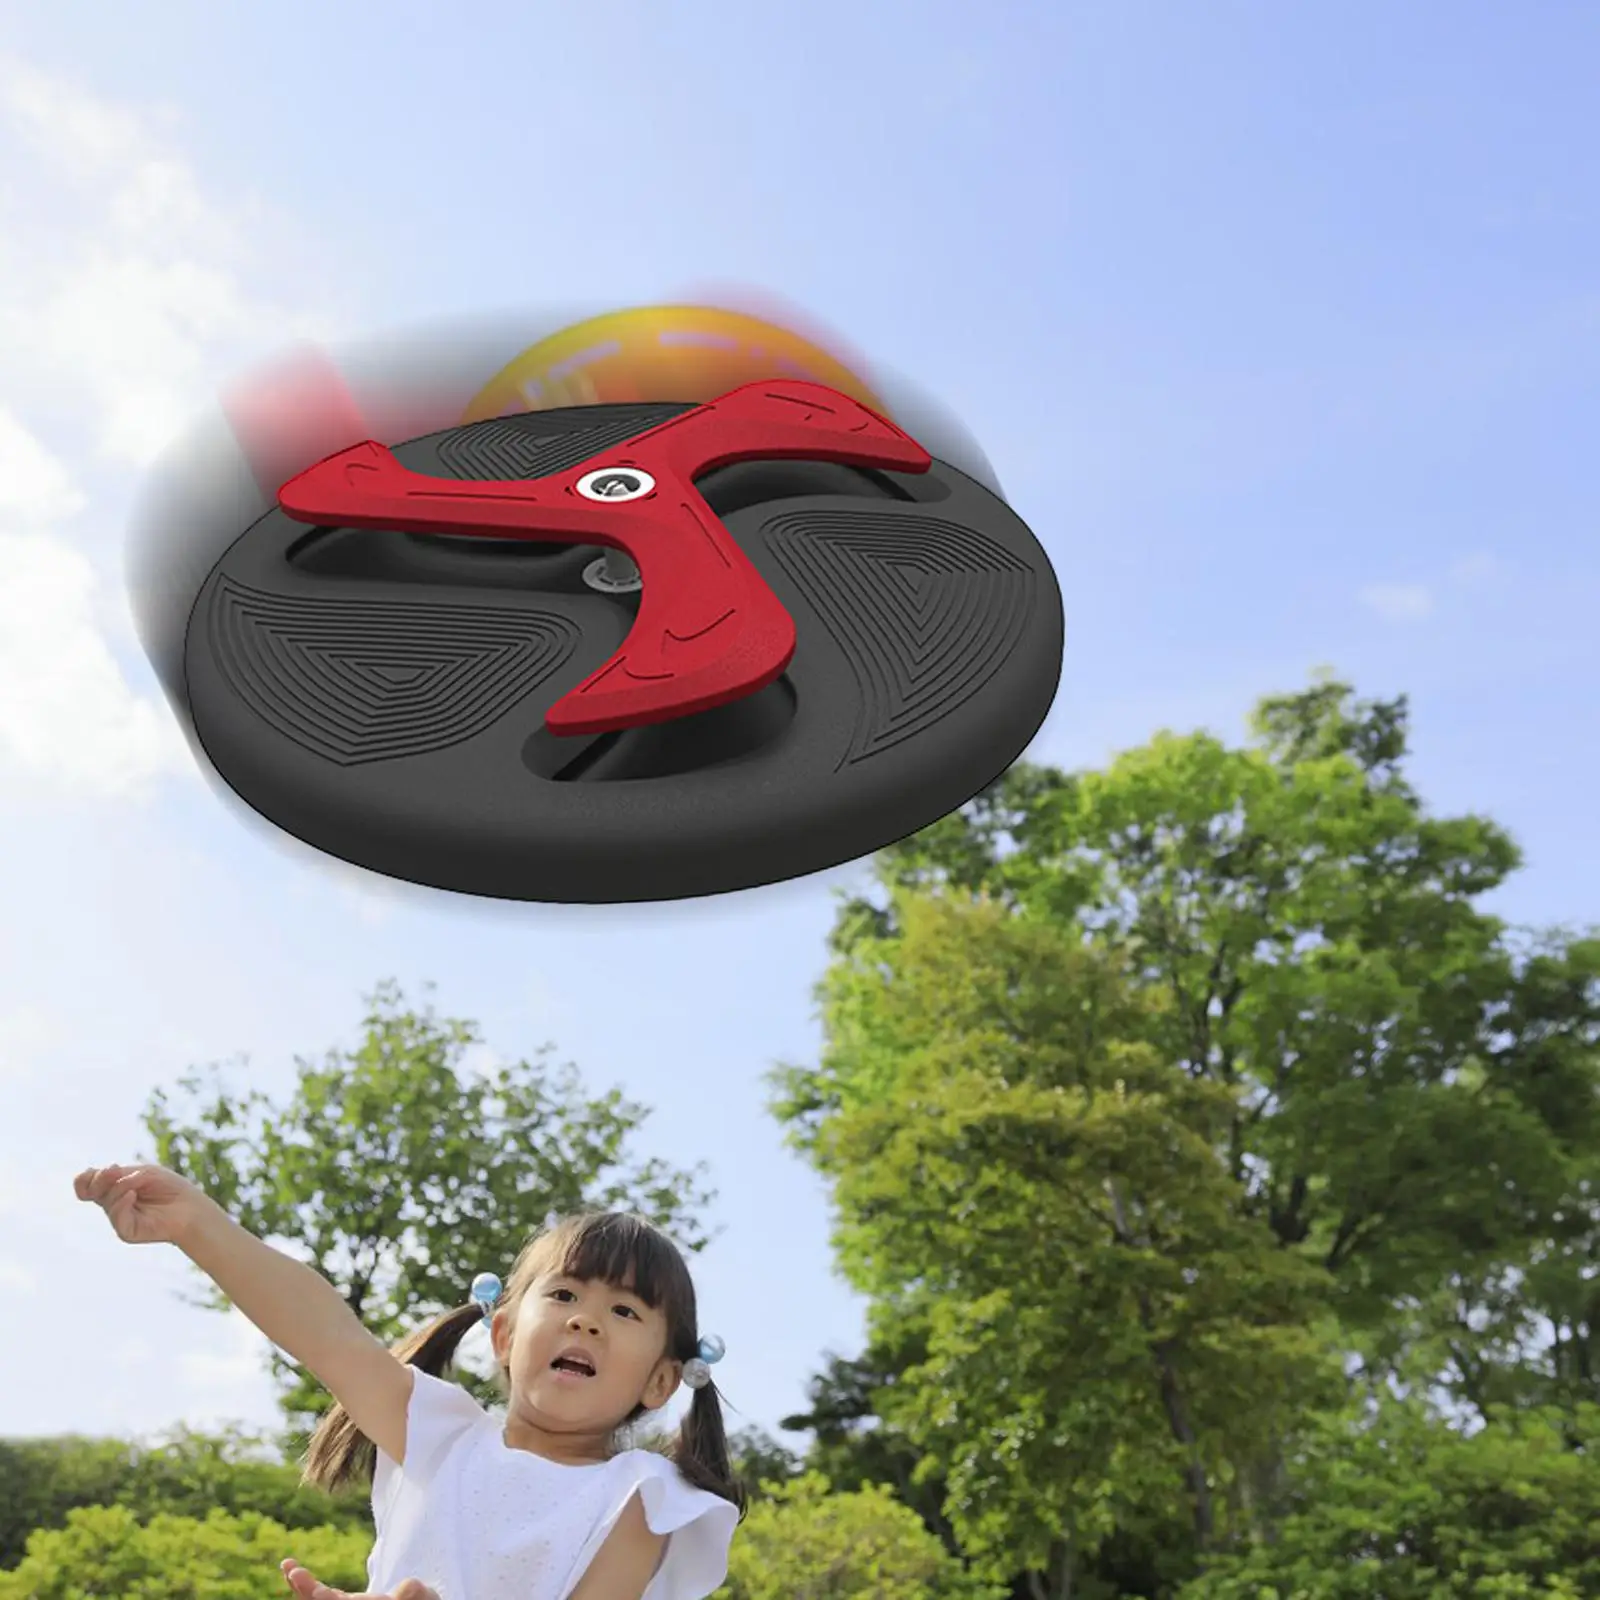 Kids Soft Flying Discs Removable Portable Throwing for Catching Party Indoor